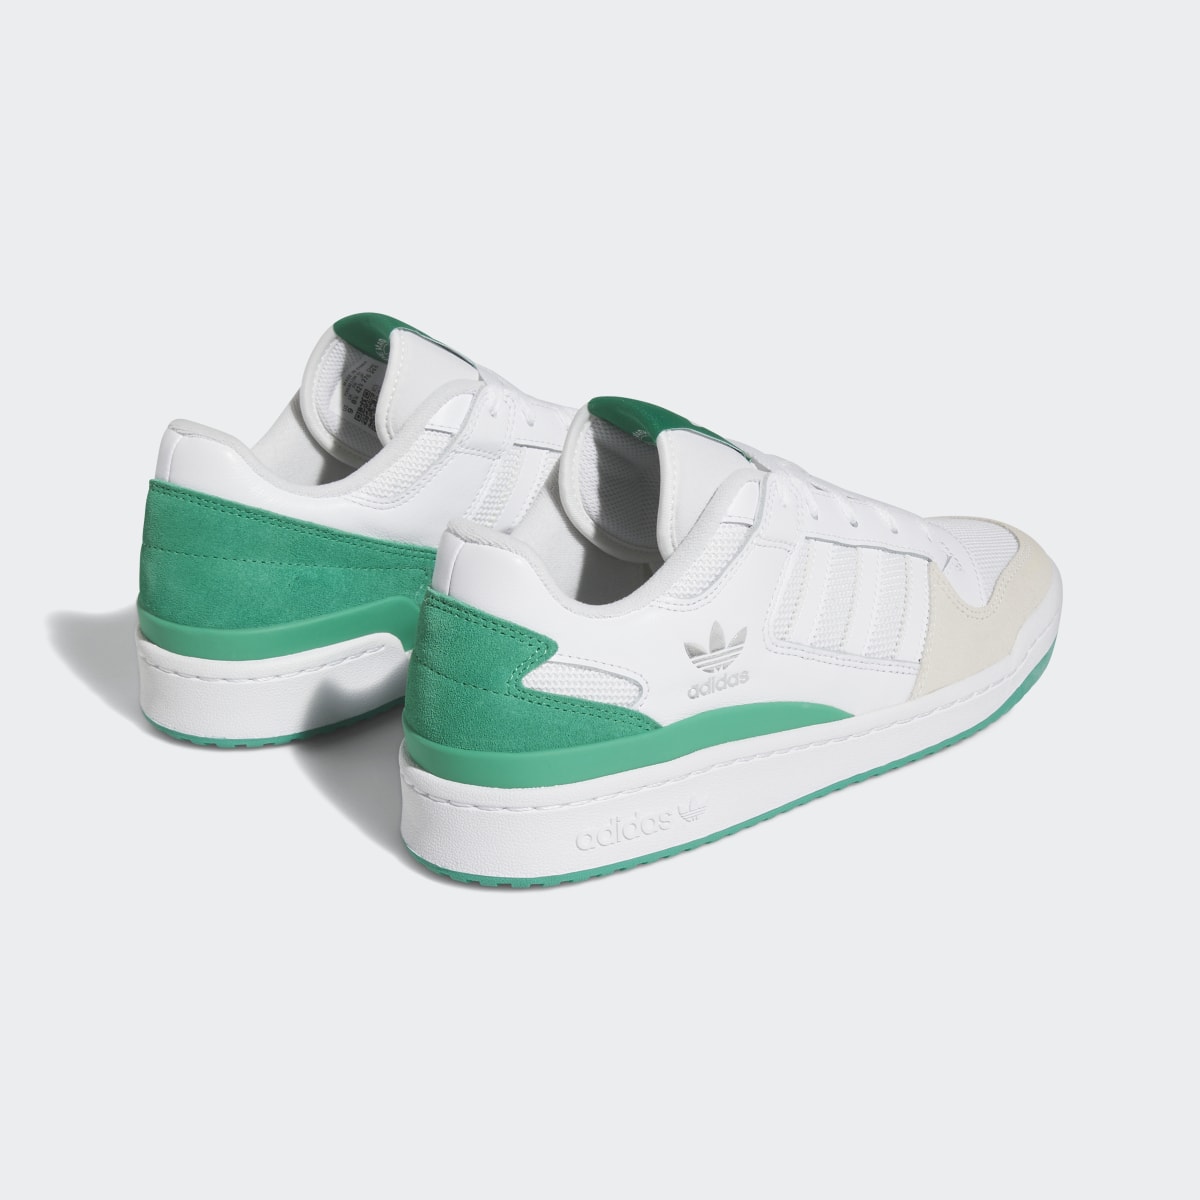 Adidas Forum Low Classic Shoes. 6